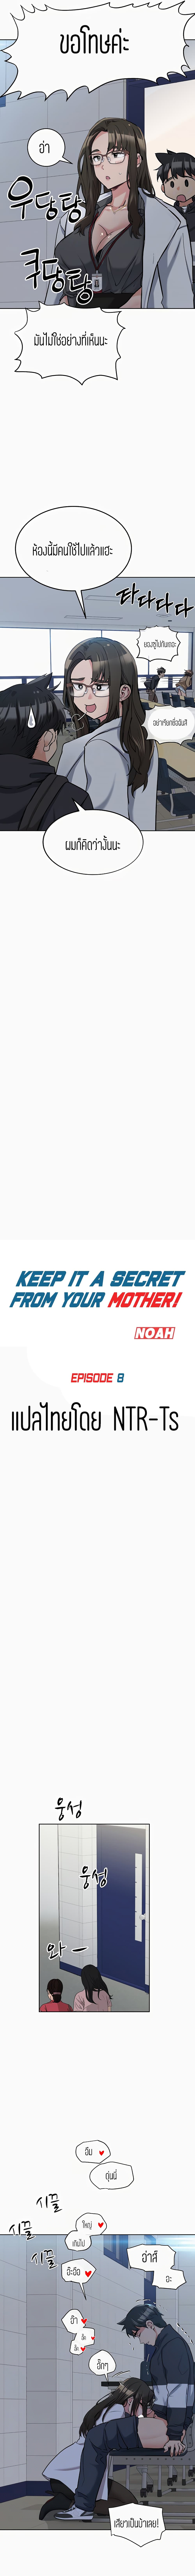 Keep it A Secret from Your Mother! 8-8